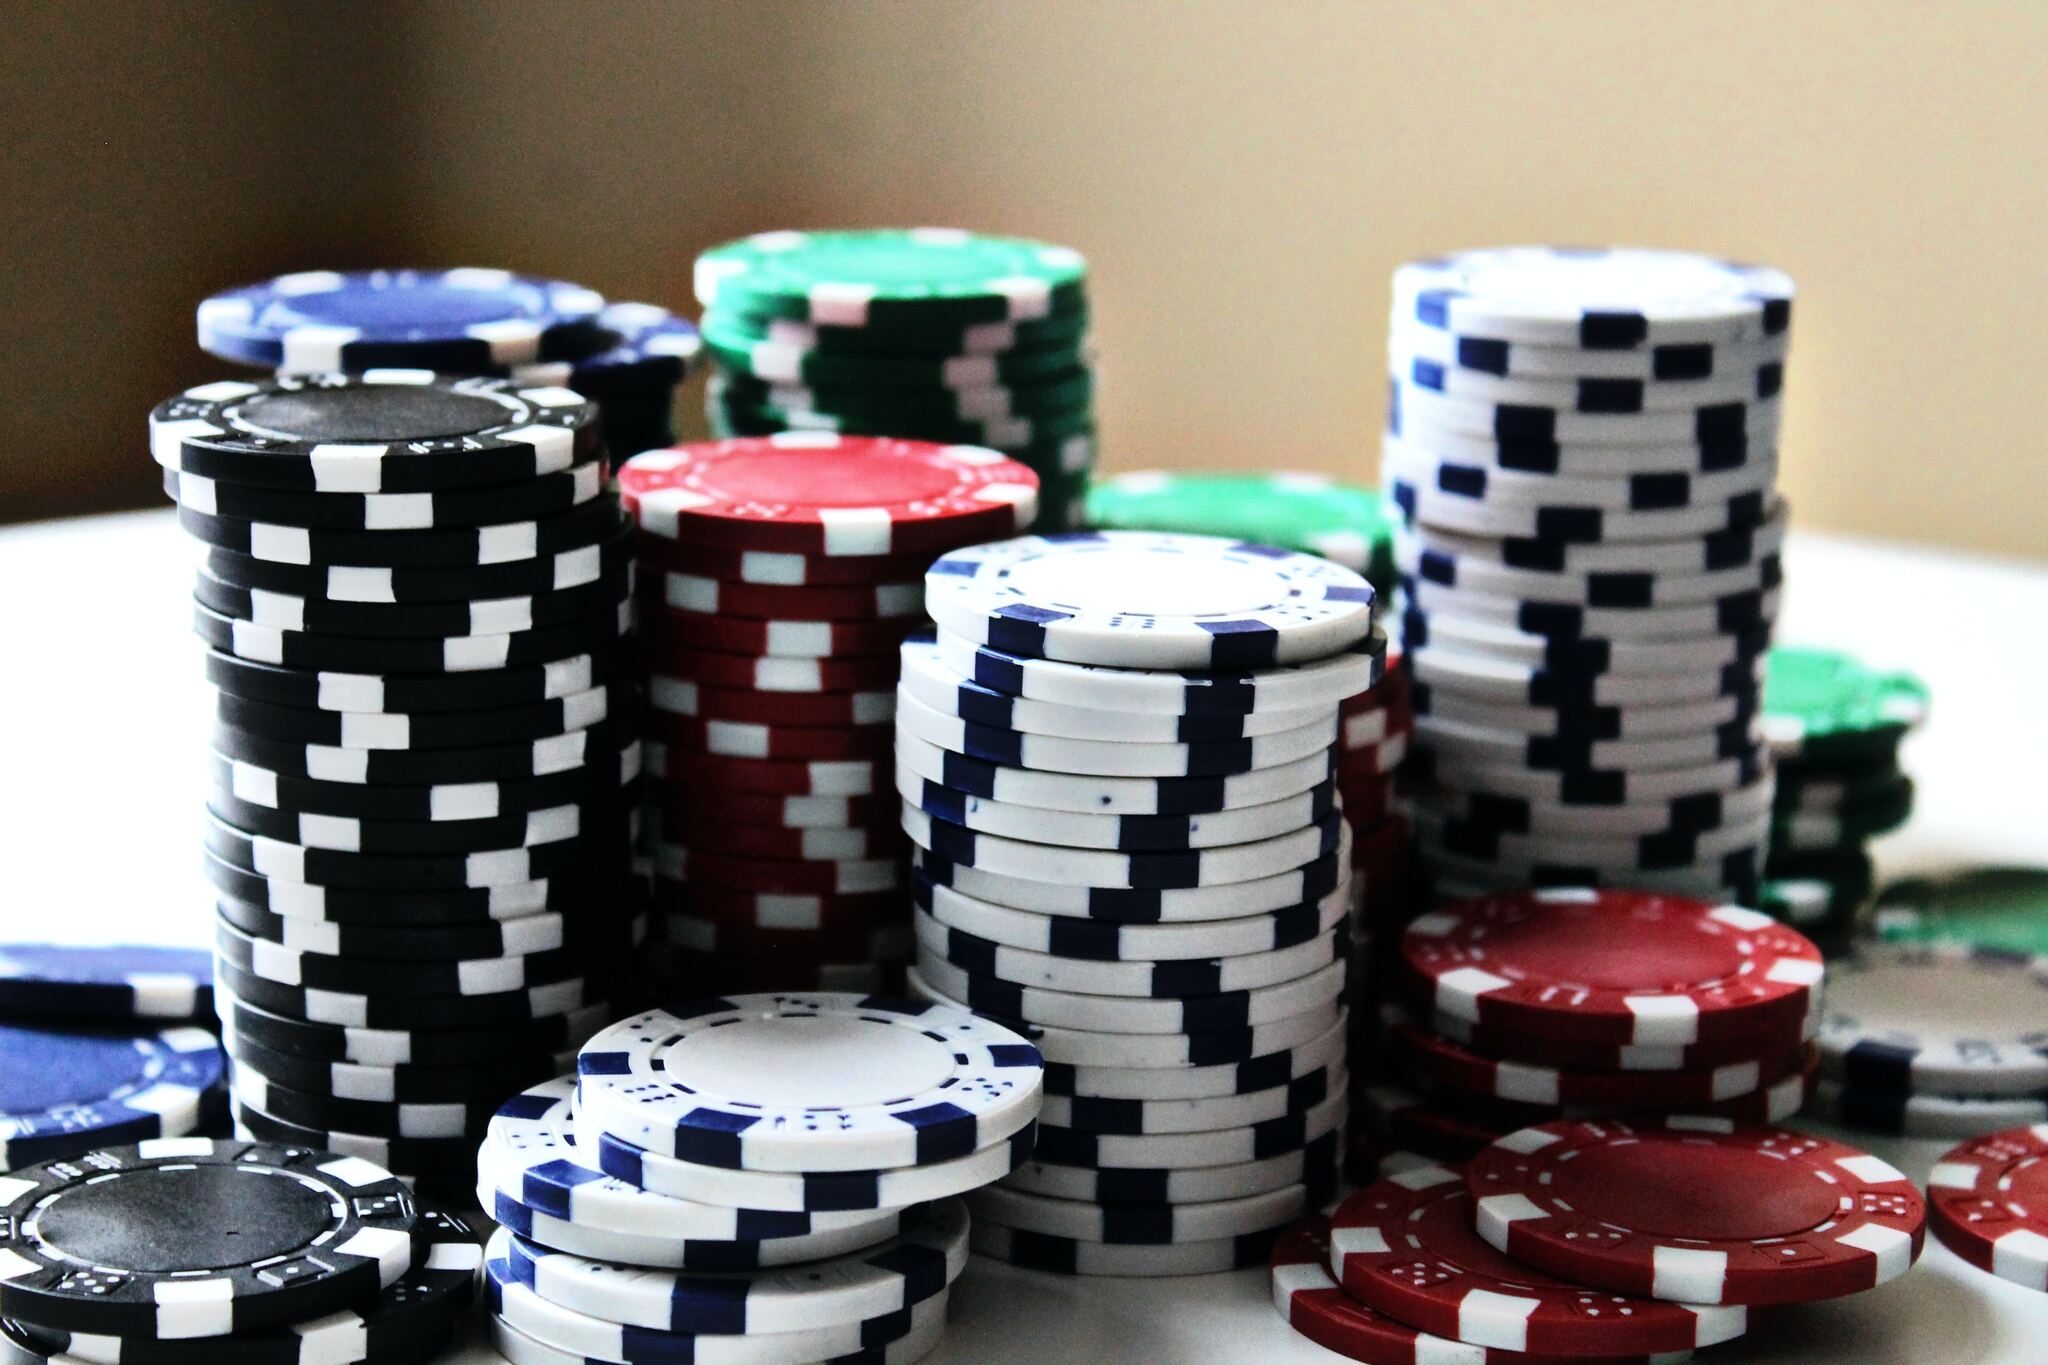 Poker chips of various colors and stacks arranged on a table.